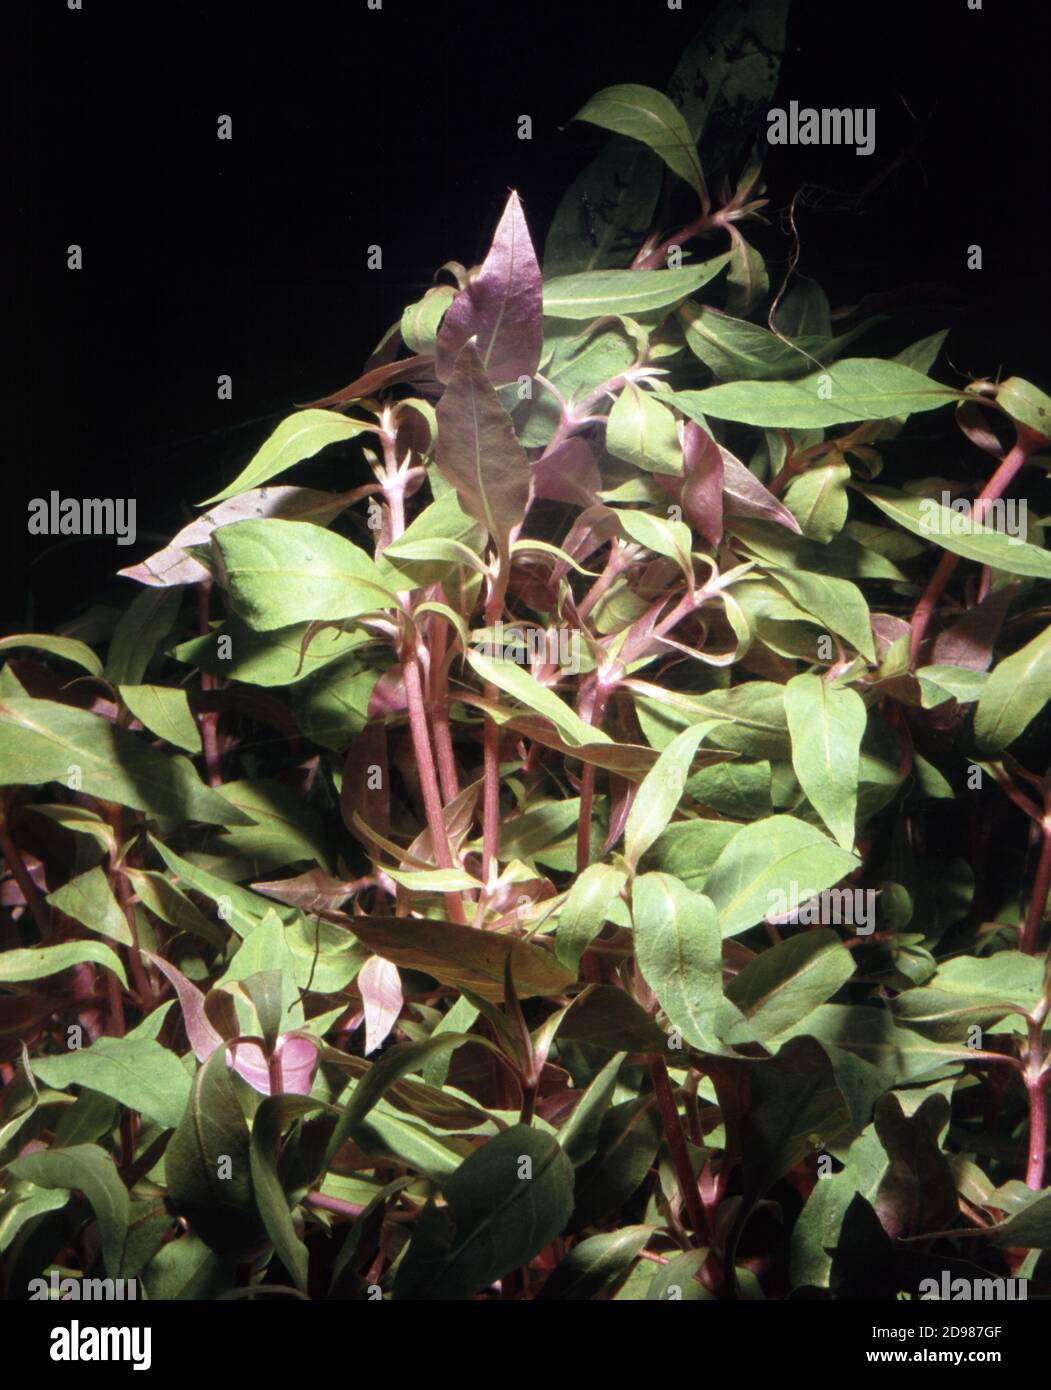 Alternanthera reineckii is a species of aquatic plant in the family Amaranthaceae Stock Photo